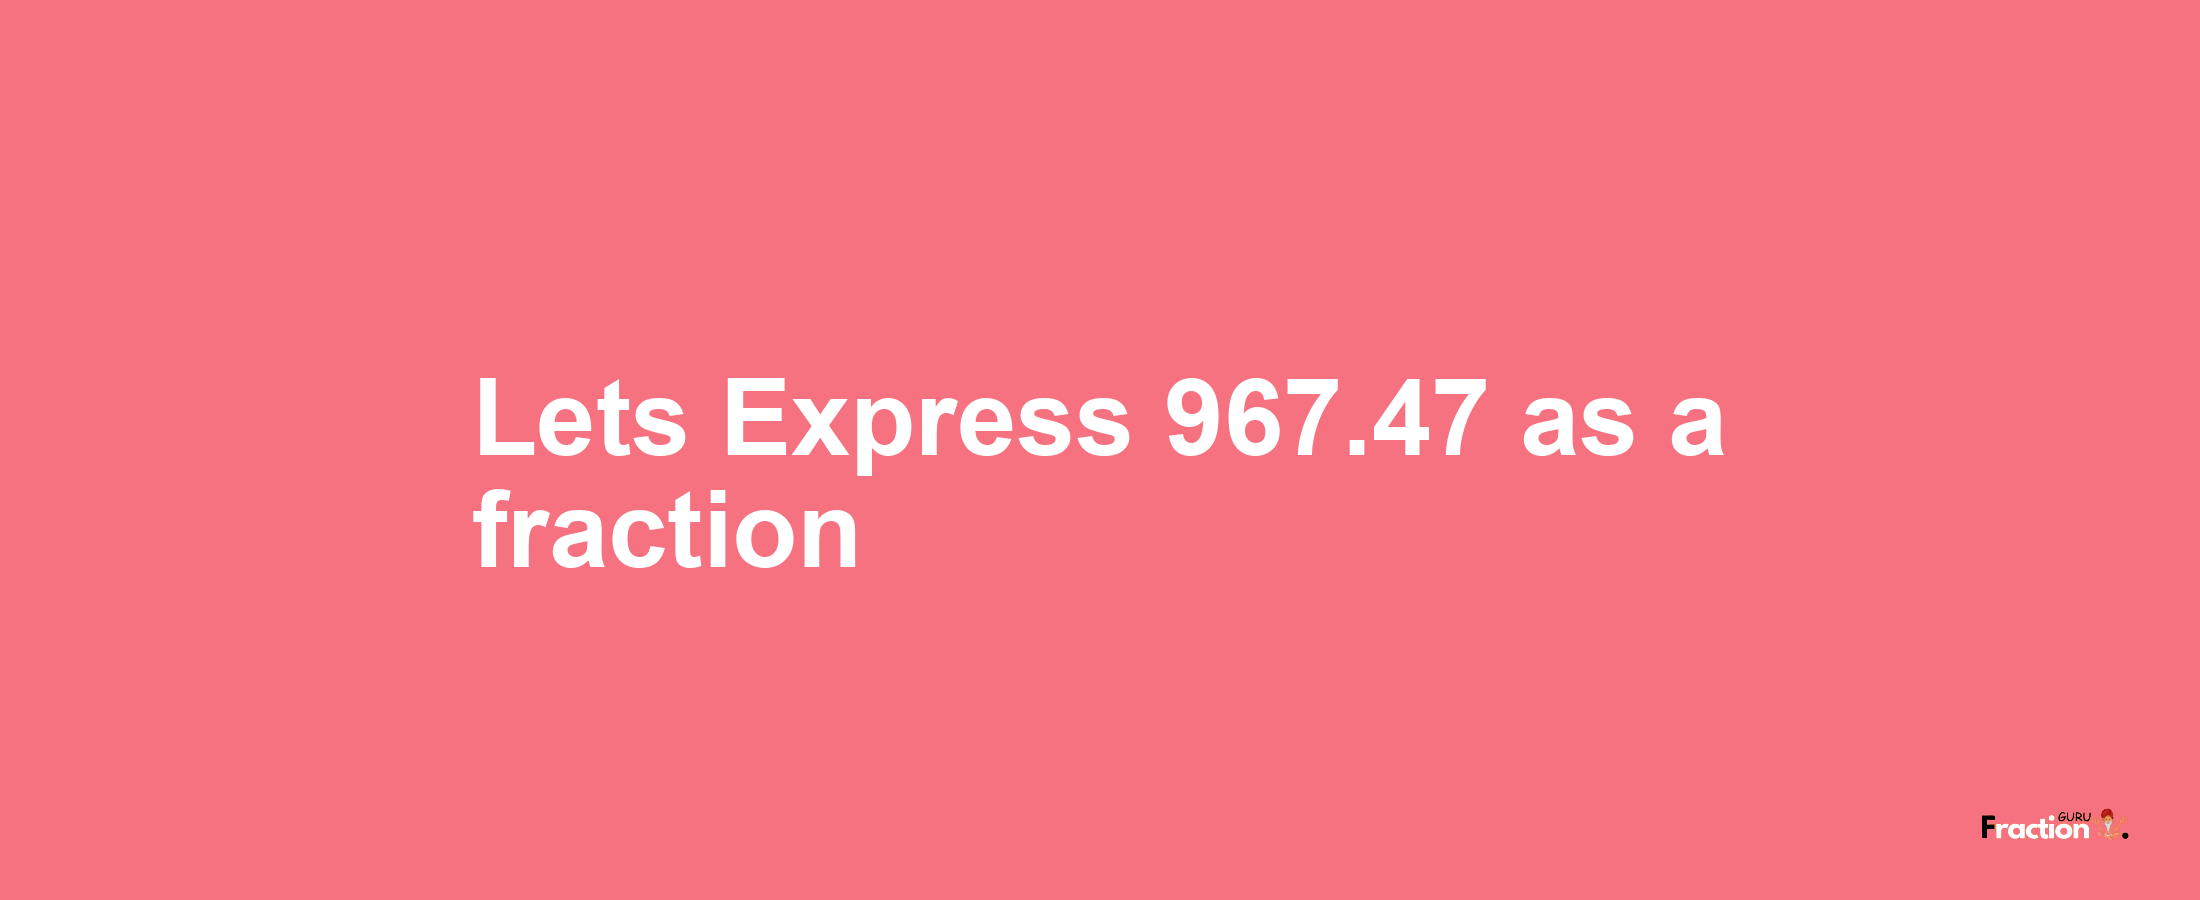 Lets Express 967.47 as afraction